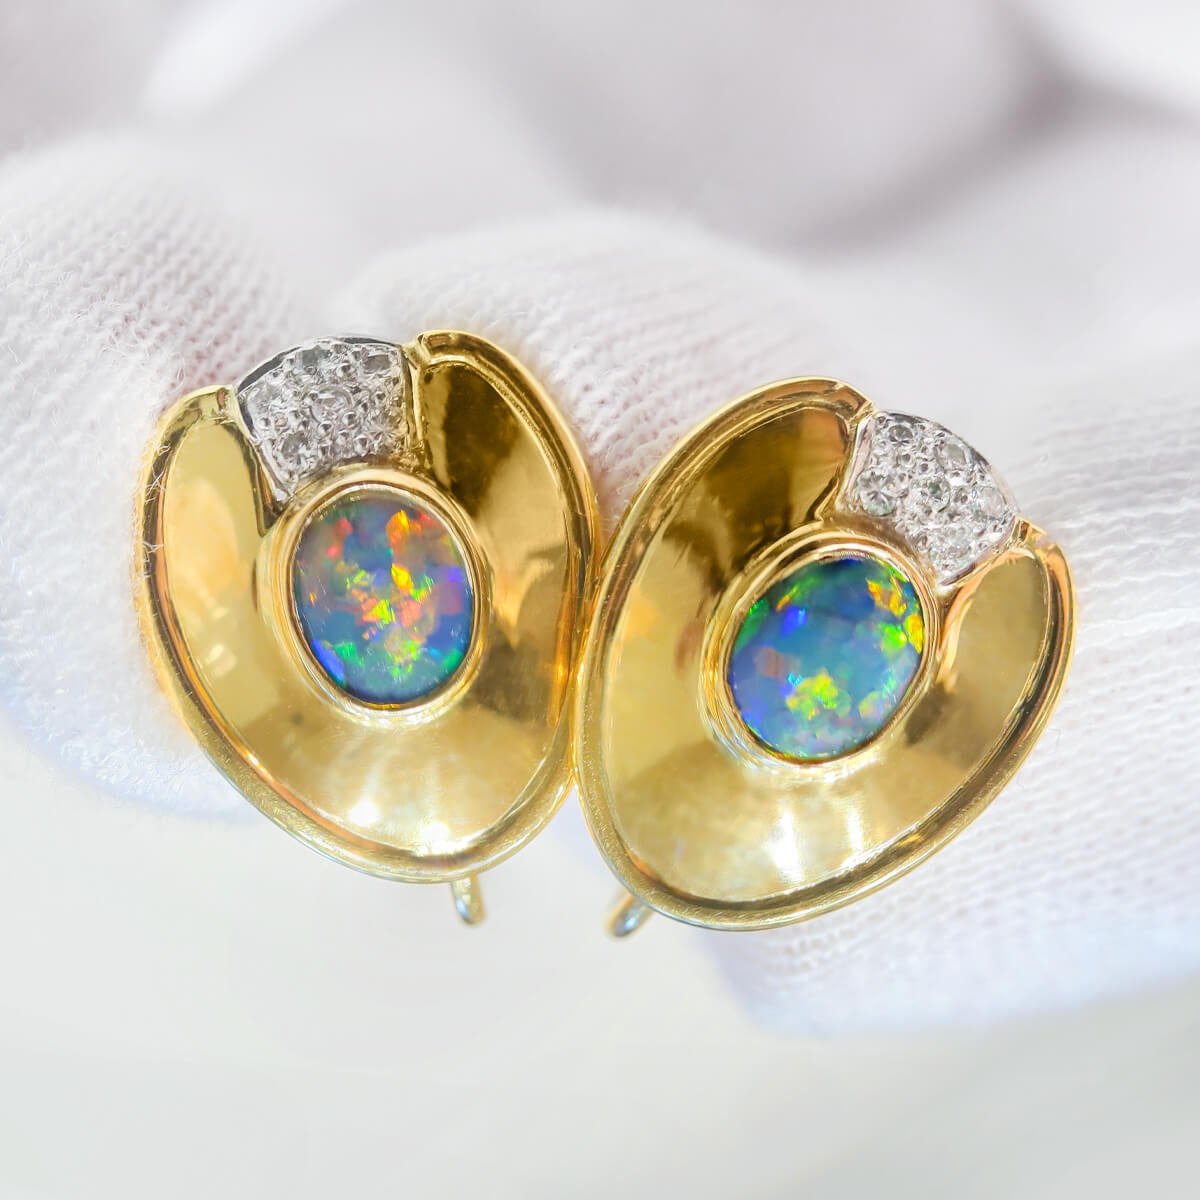 These lovely black opal and diamond screw-back earrings are just adorable. Elegance mixed with practicality, perfect for everyday wear and equally suited to go with your favourite work outfit or that little black dress on an evening out. Screw backs